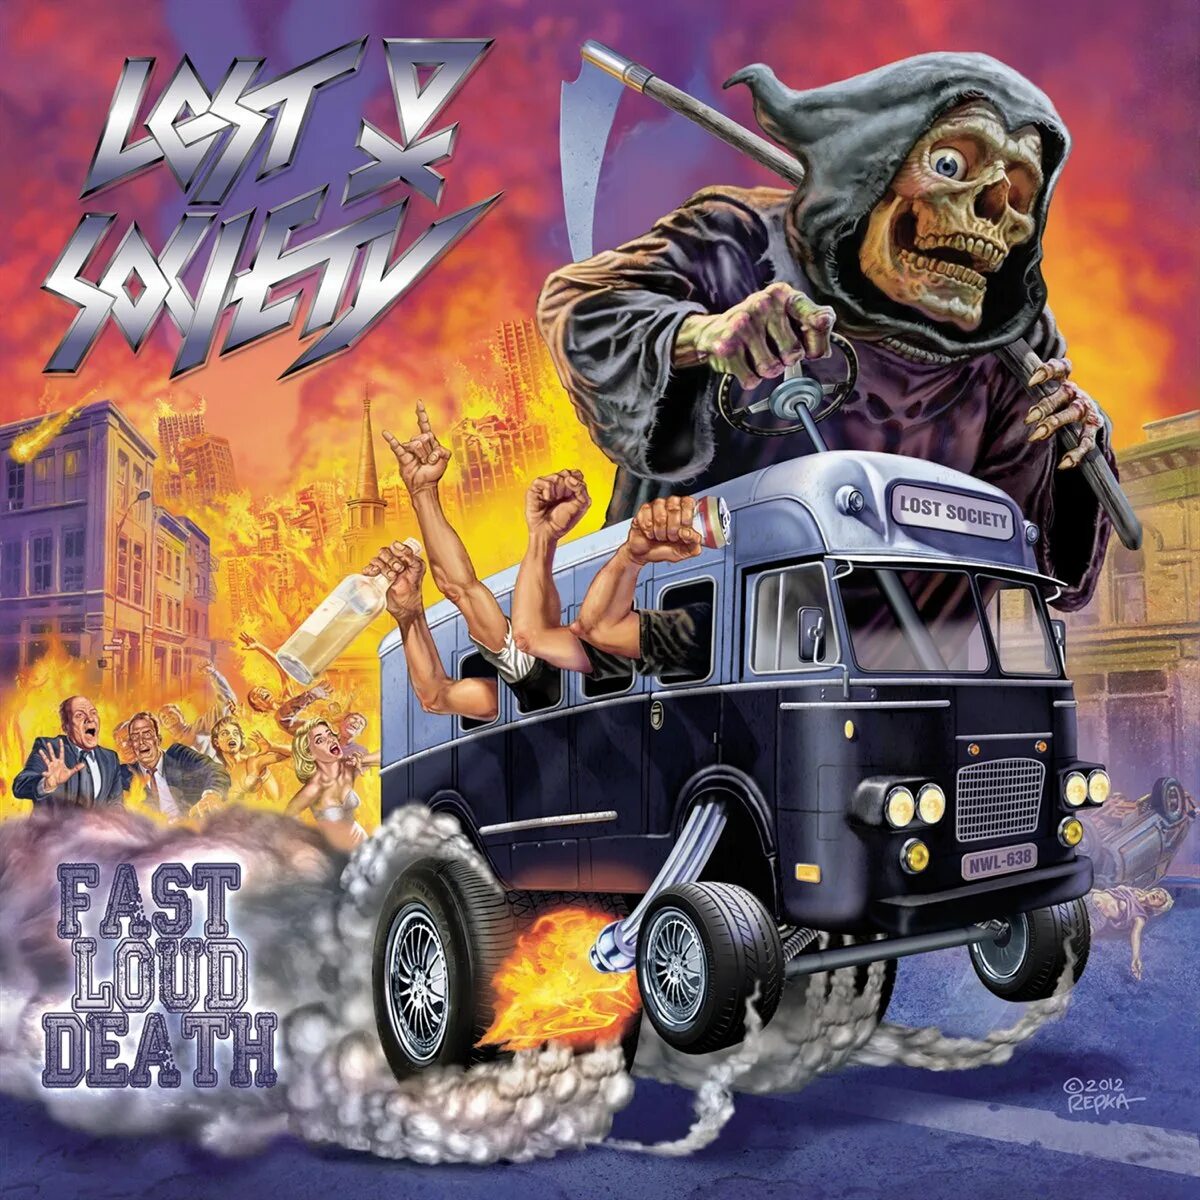 Lost Society - fast Loud Death (2013). Lost Society альбом fast Loud Death. Lost Society fast Loud Death обложка.